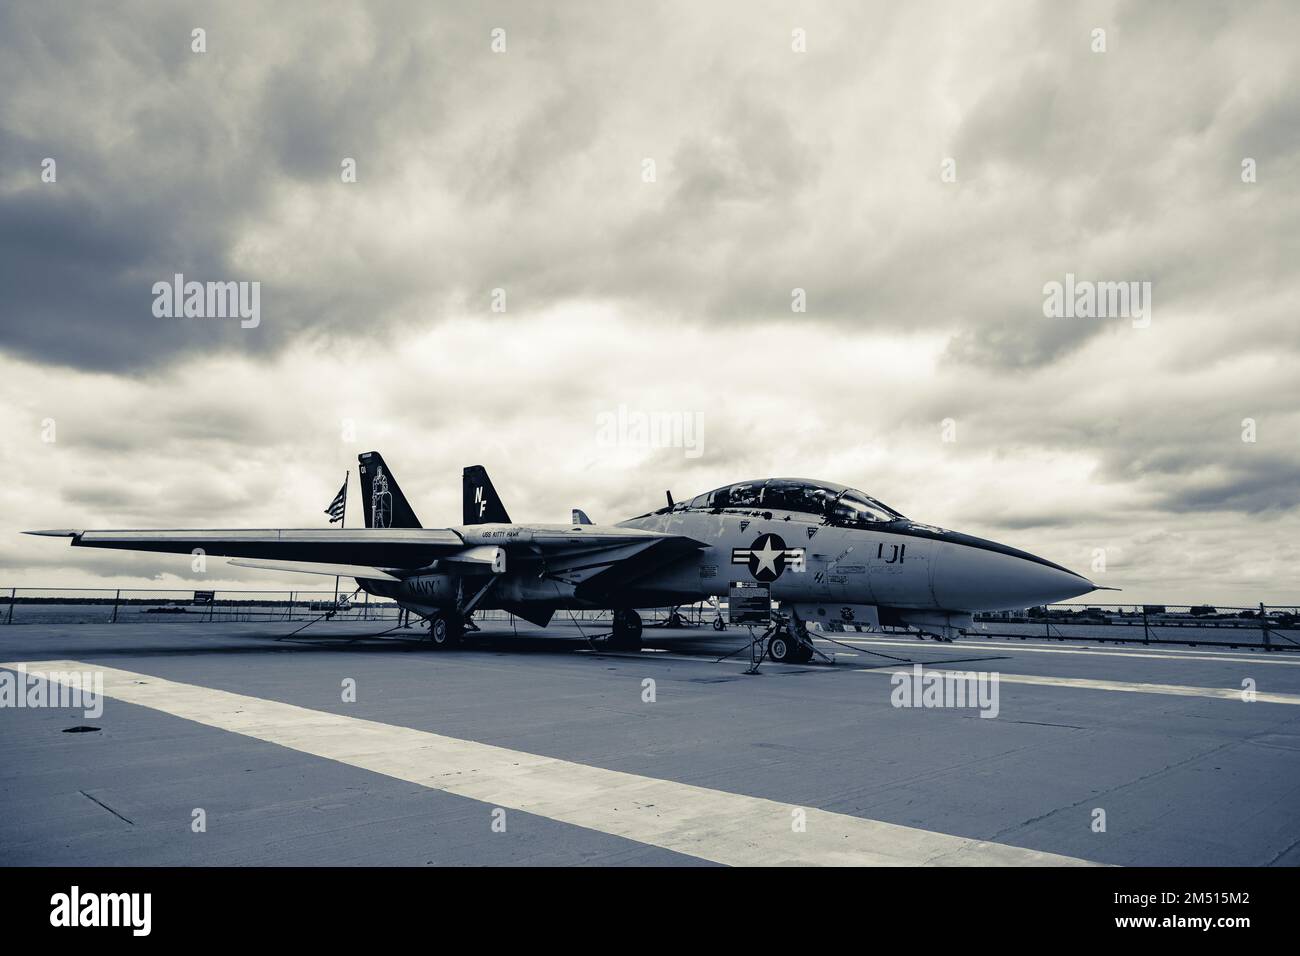 A scenic view of an F-14 Tomcat Fighter jet seen on the USS Yorktown Stock Photo